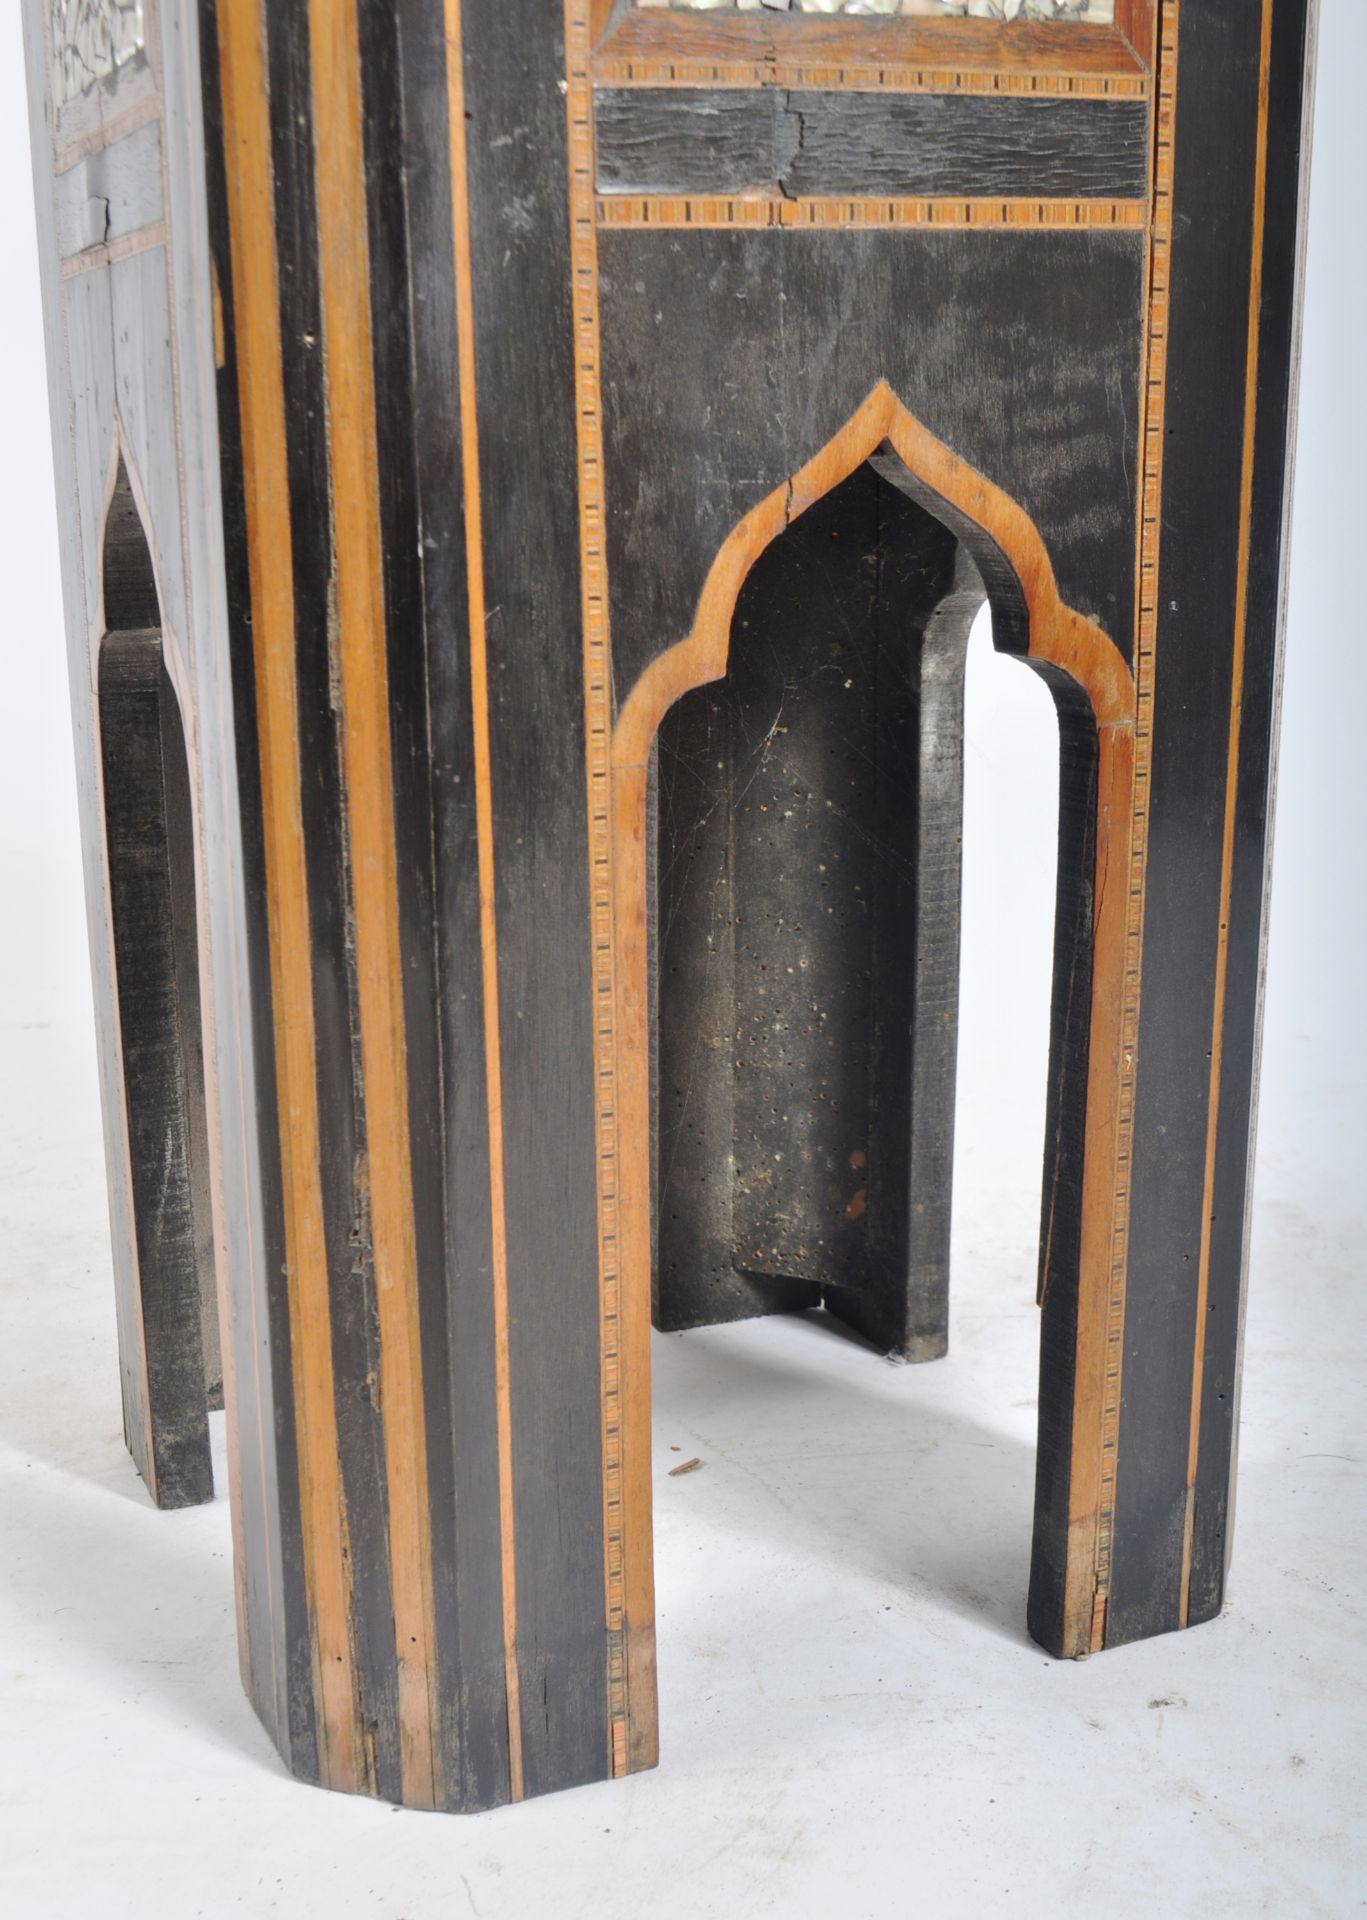 19TH CENTURY MIDDLE EASTERN ISLAMIC INLAID TABLE STAND - Image 4 of 7